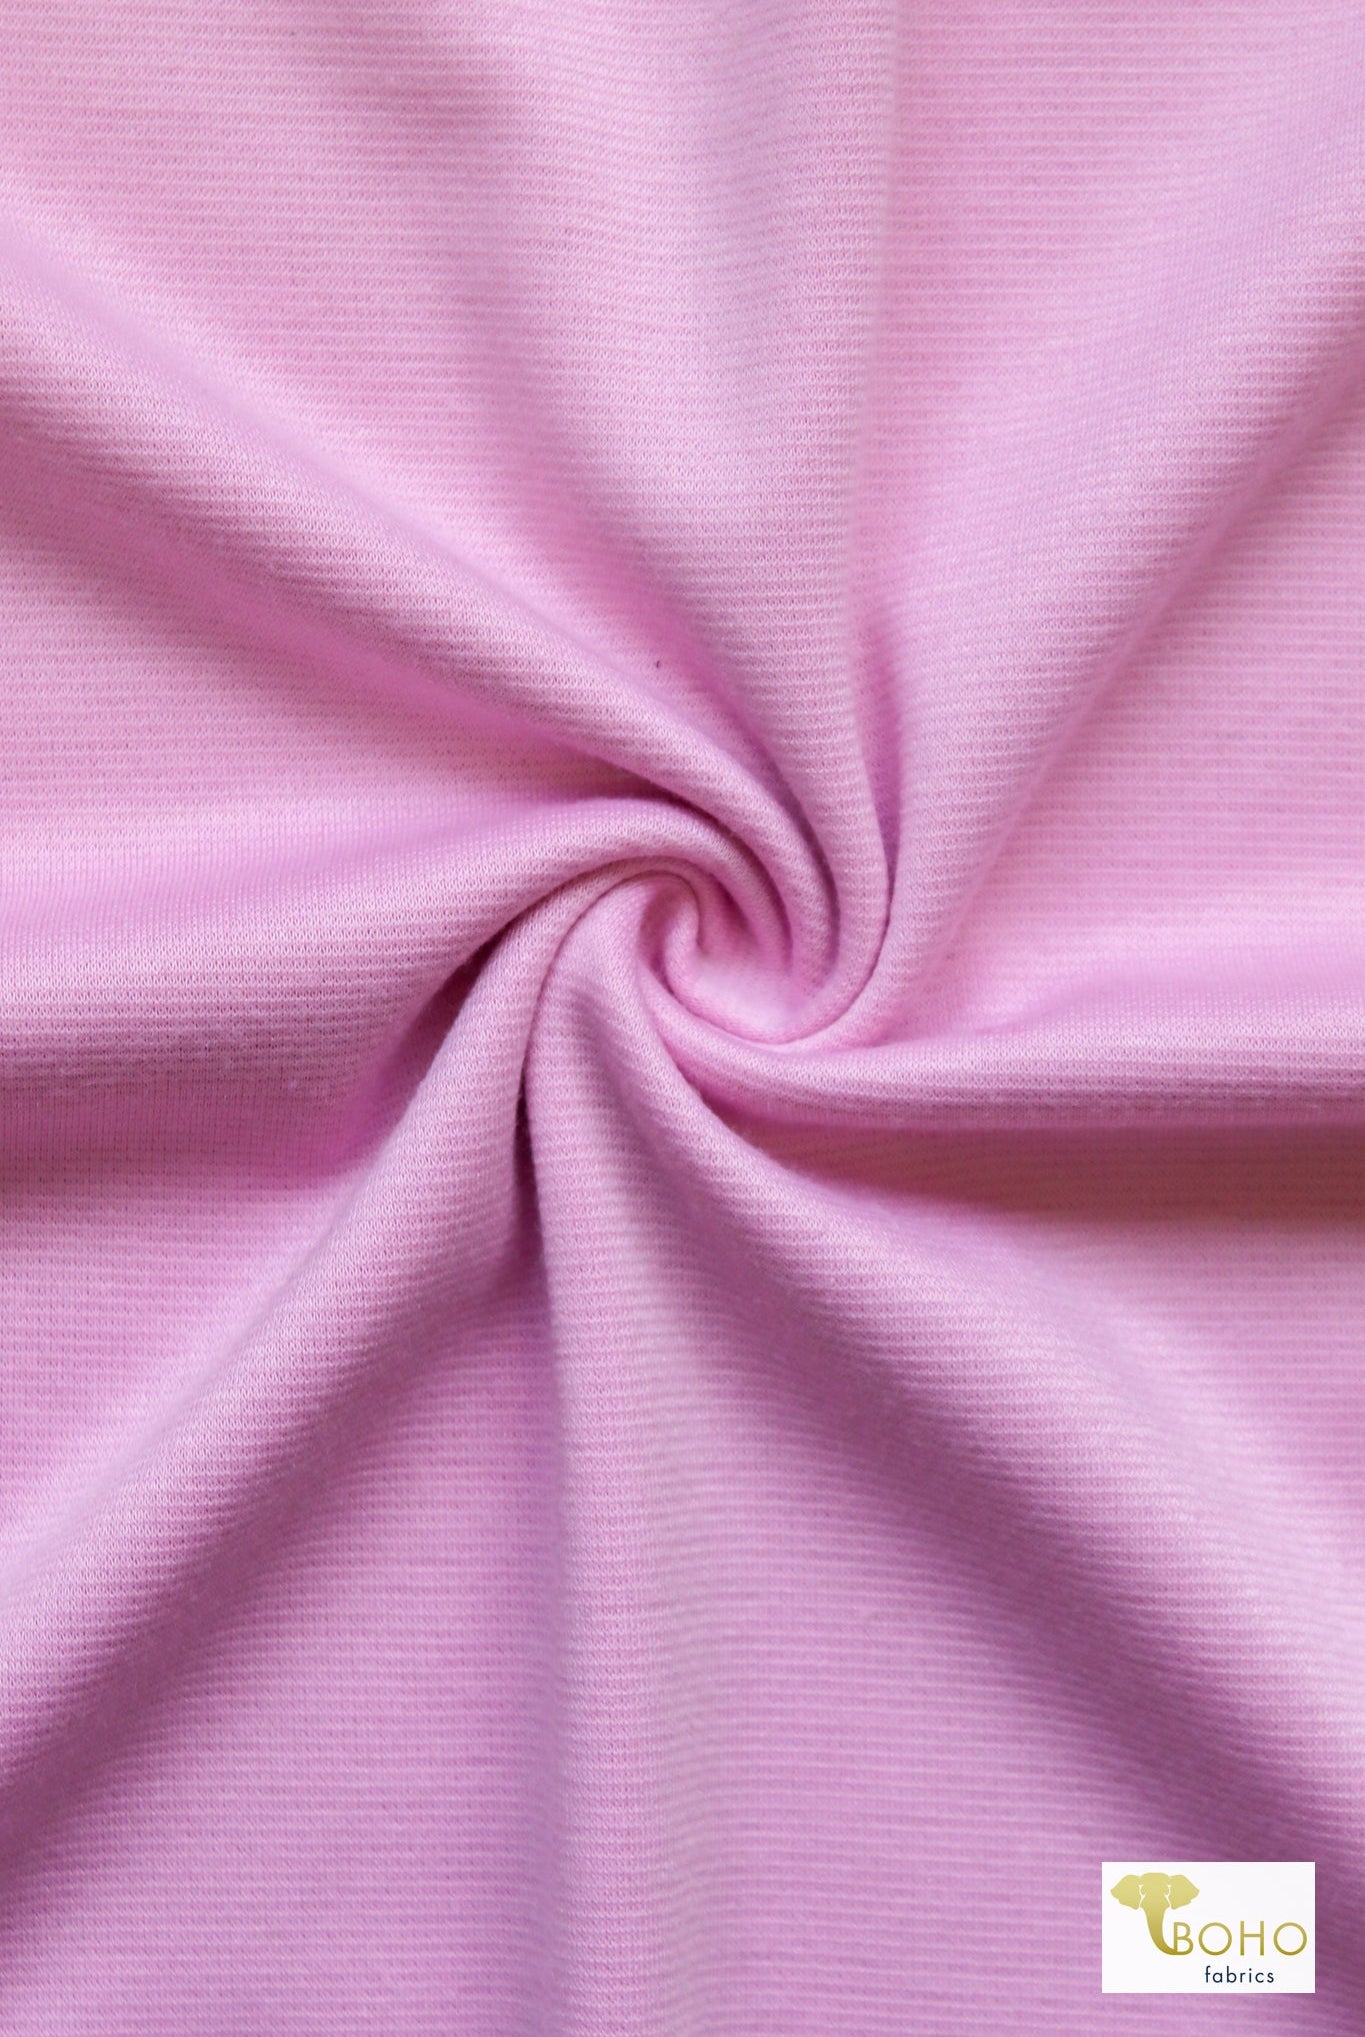 Lilac Pink Double Knit, Ponte Solid Knit Fabric - Boho Fabrics